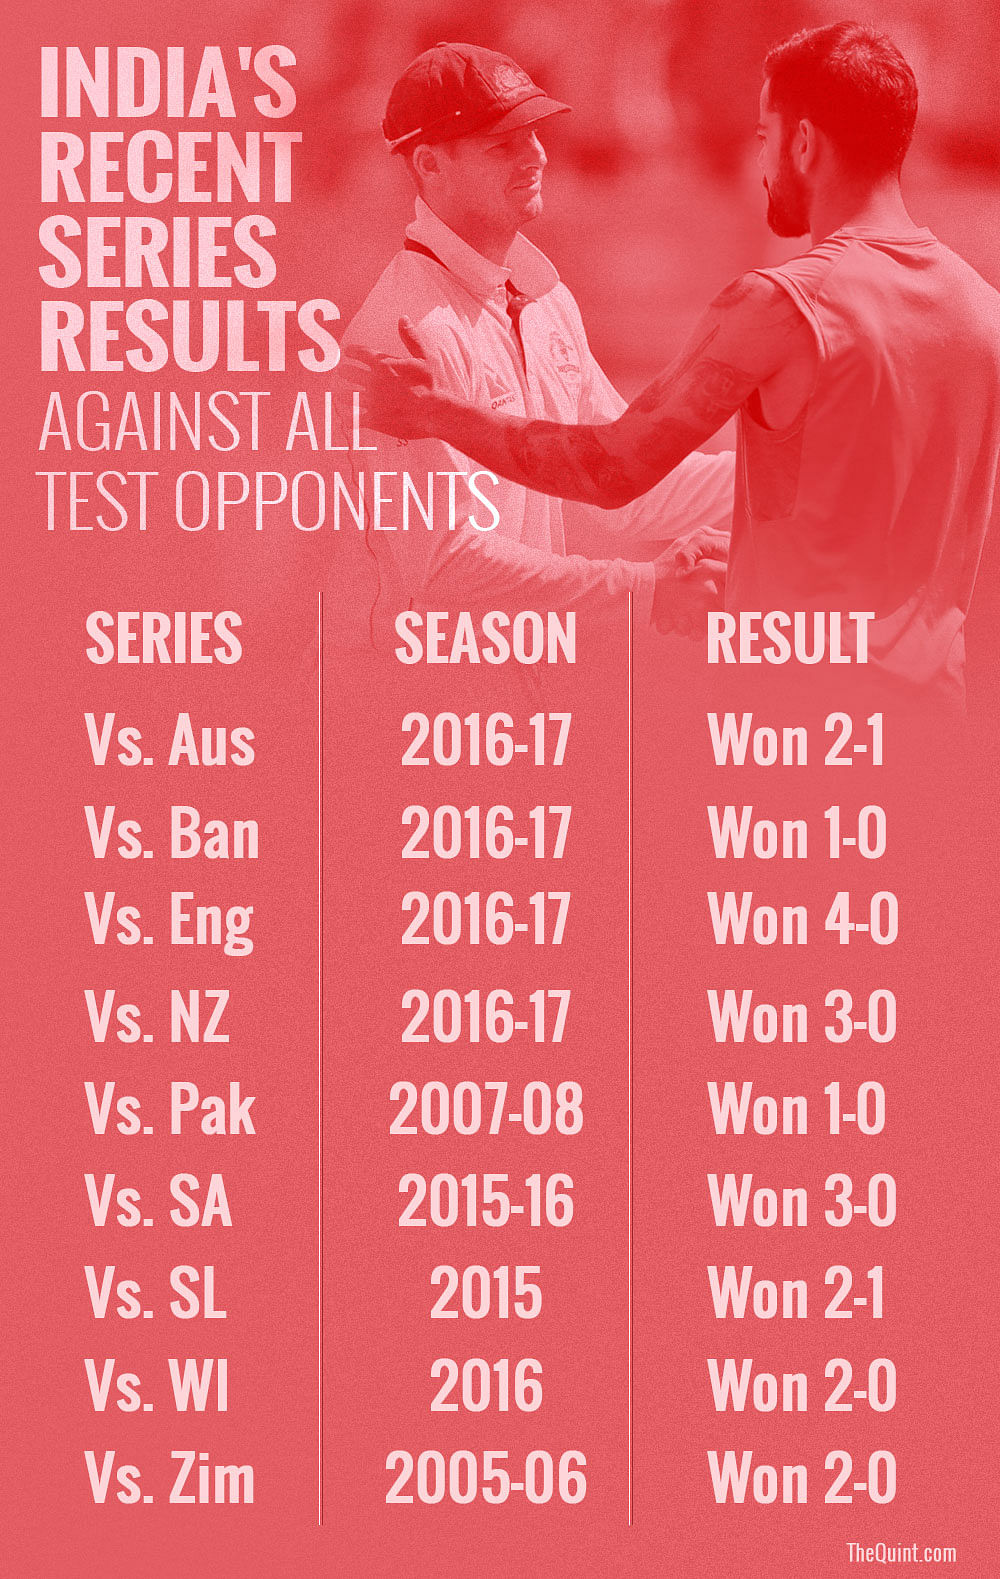 46 runs in the series before injury forced him out of the Dharamsala Test, but did you feel the absence of Virat?